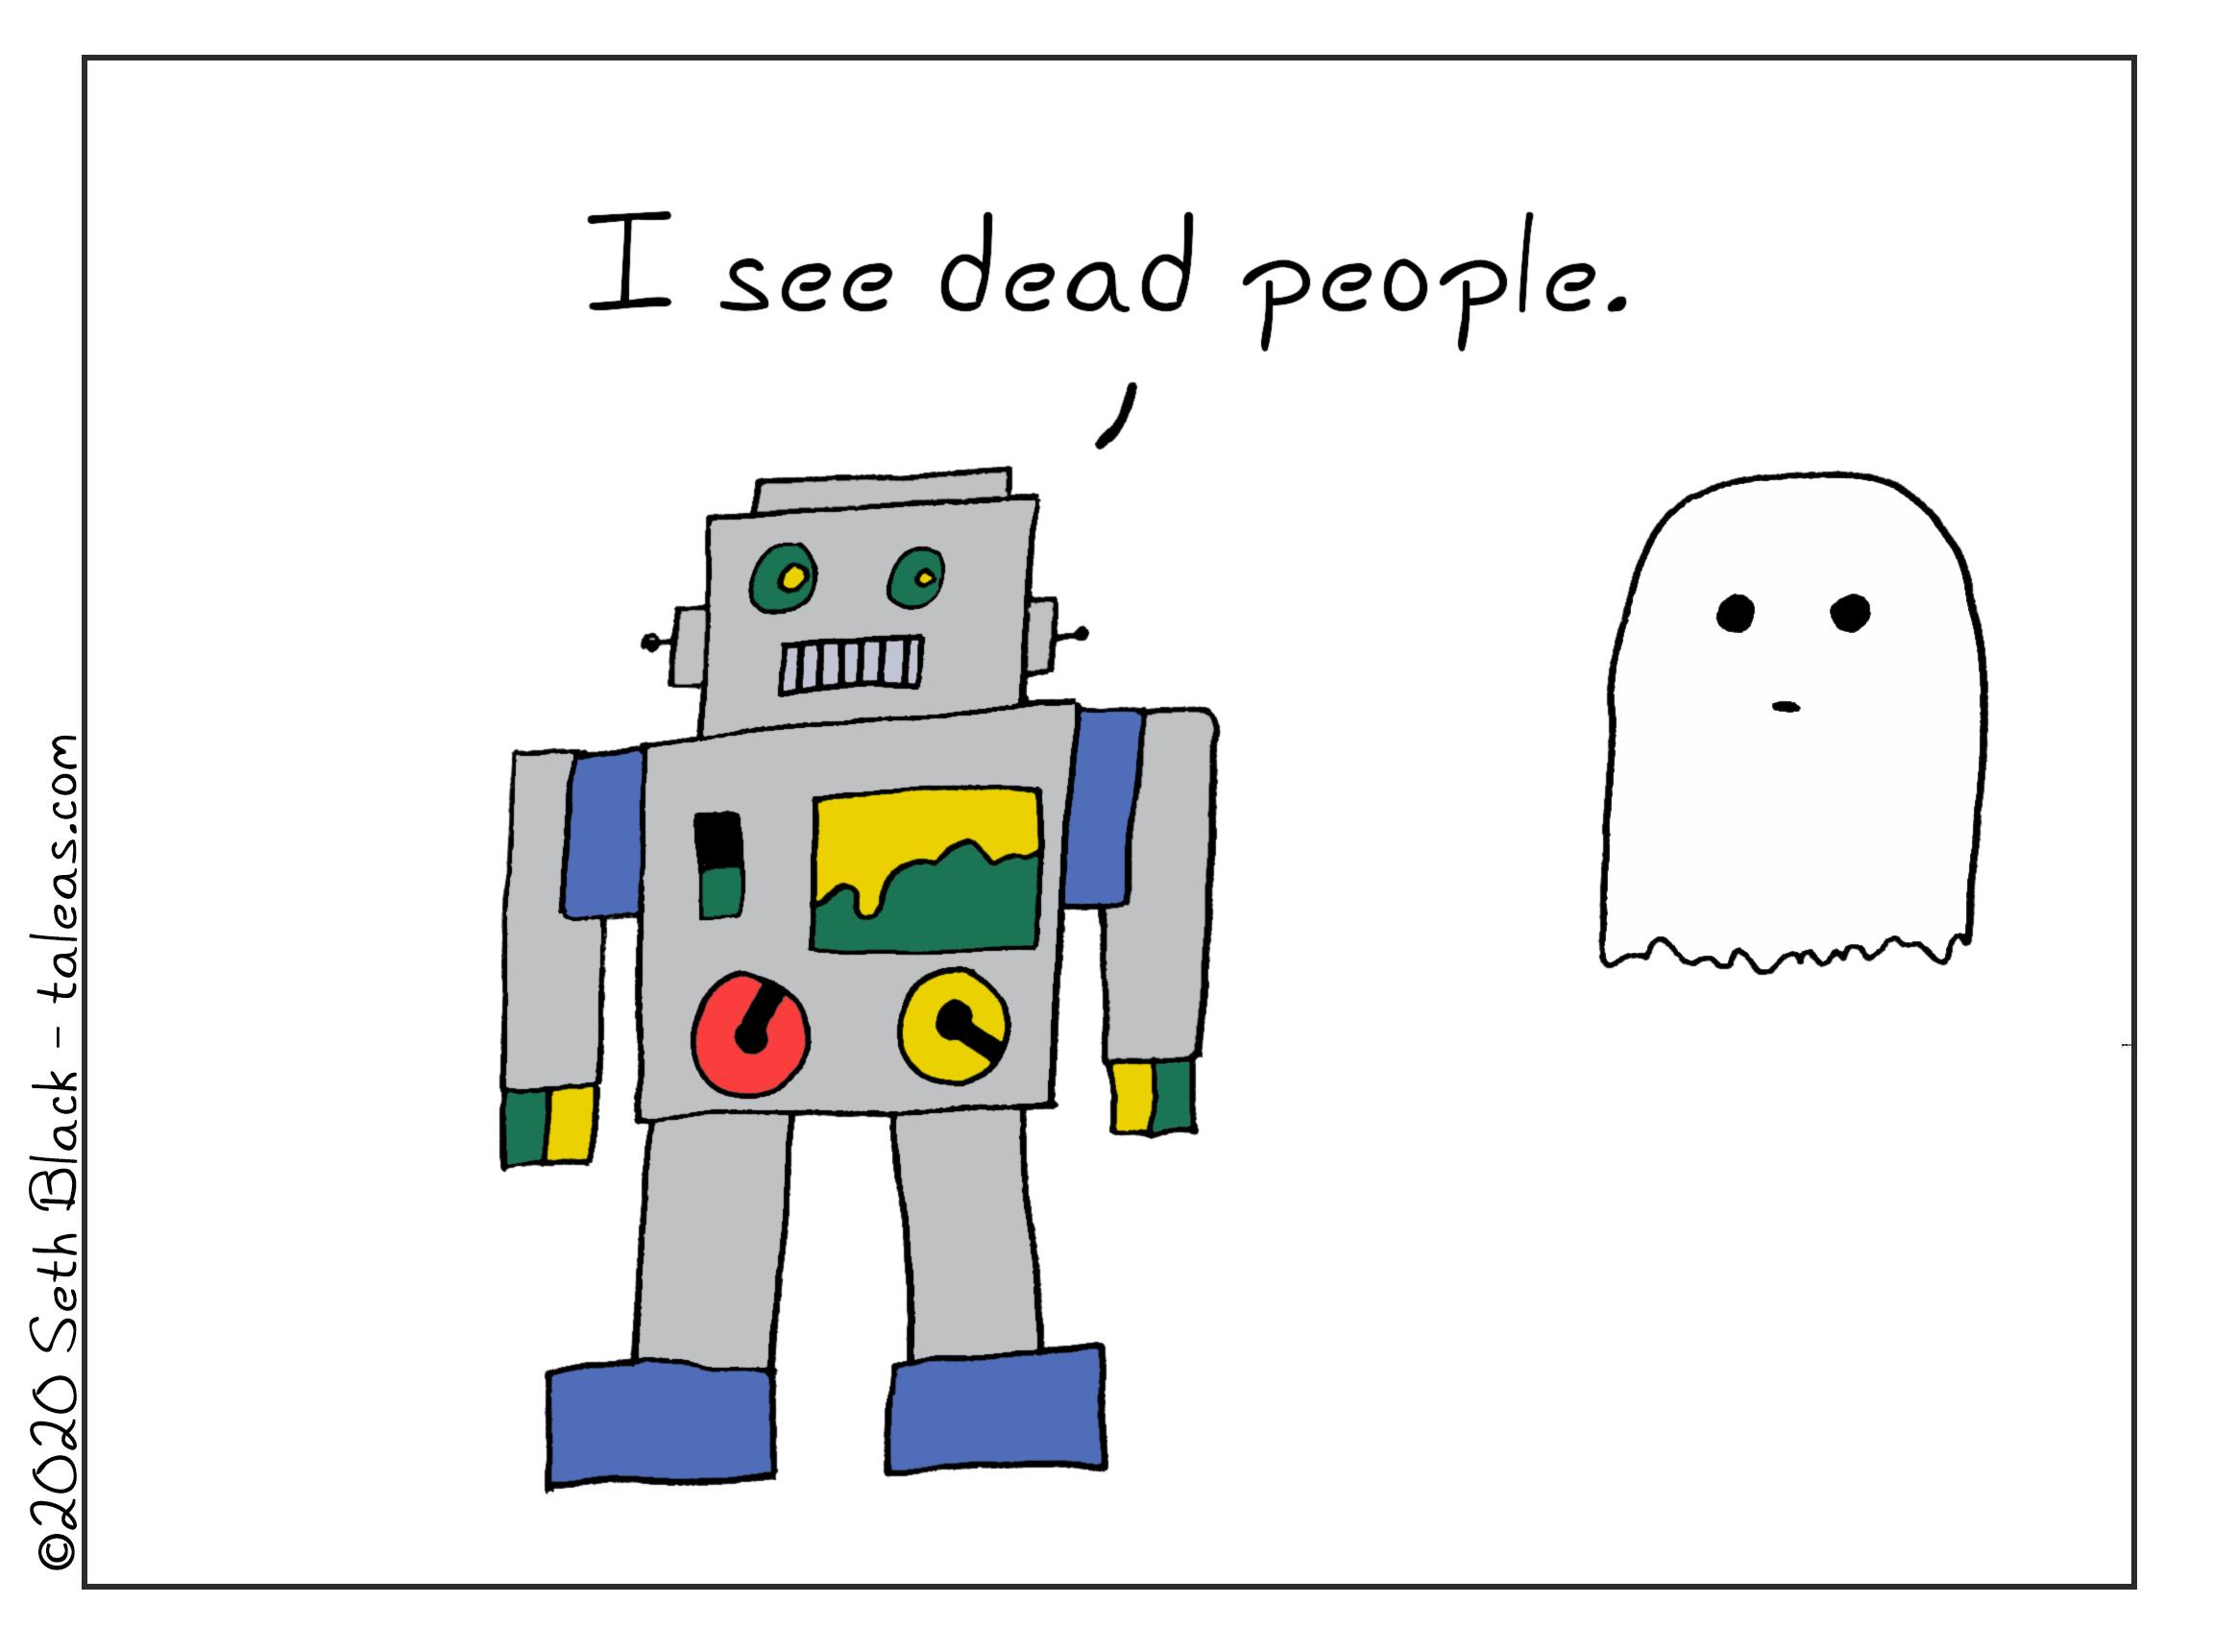 AI Bot states, "I see dead people." while a ghost floats nearby.